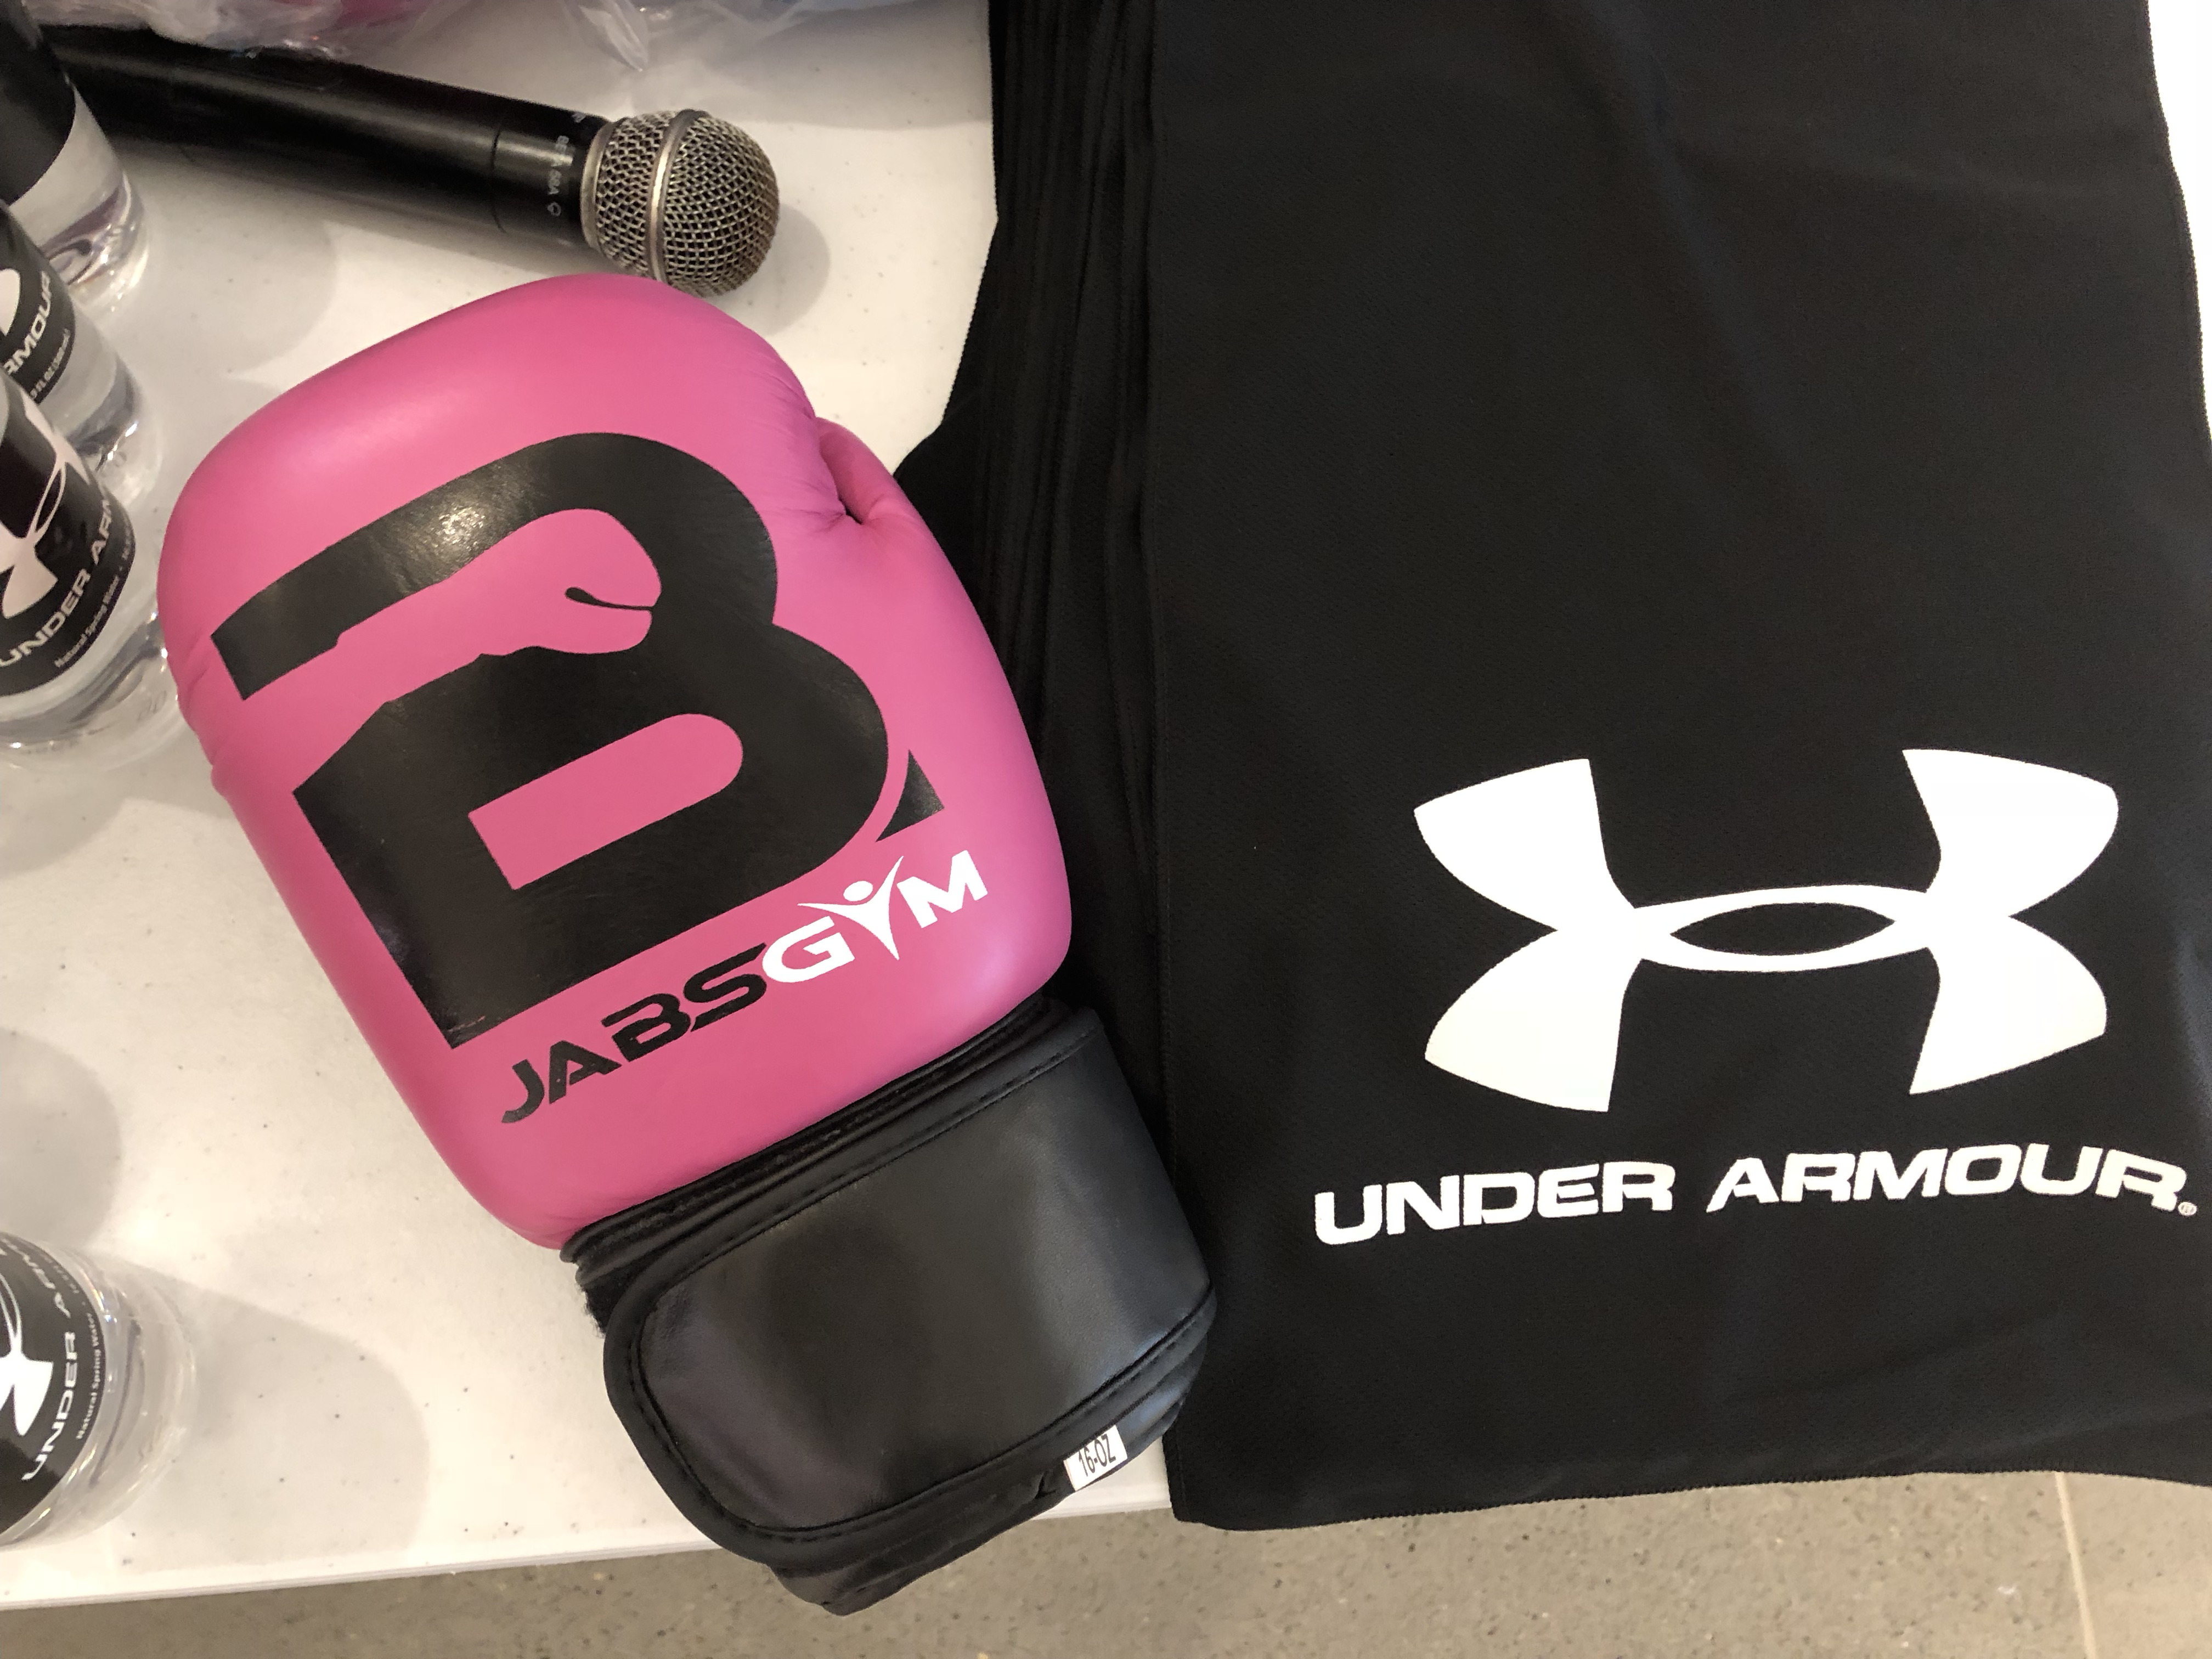 Jabs Gym x Under Armour – The Perfect Fitness Match!